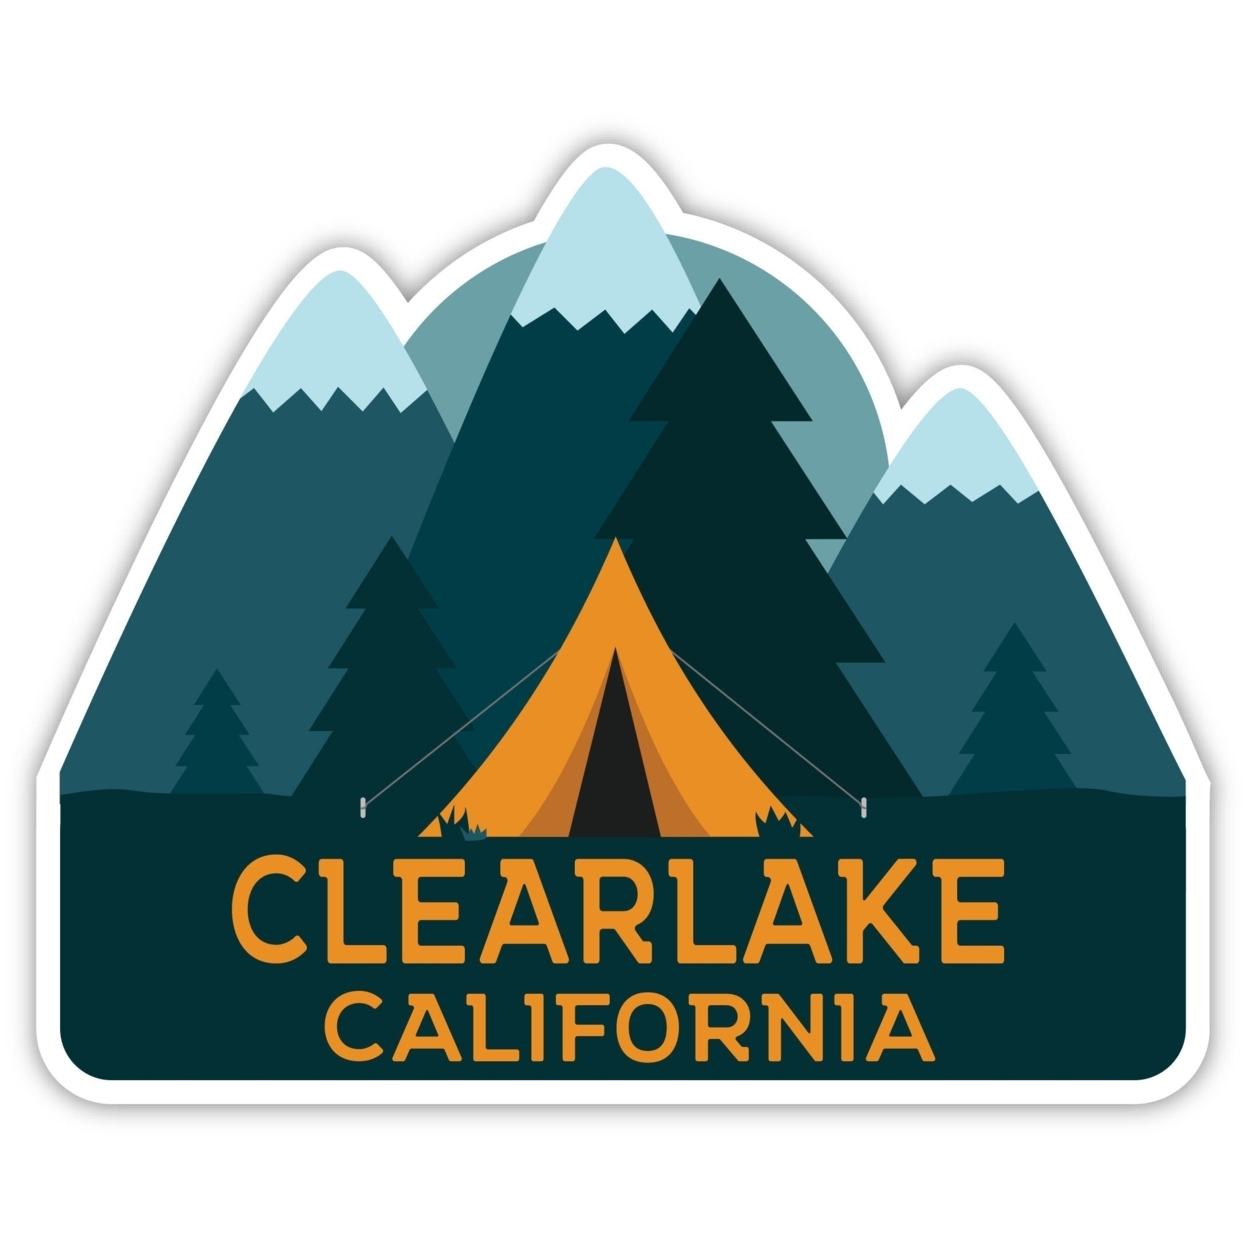 Clearlake California Souvenir Decorative Stickers (Choose Theme And Size) - 4-Pack, 12-Inch, Bear